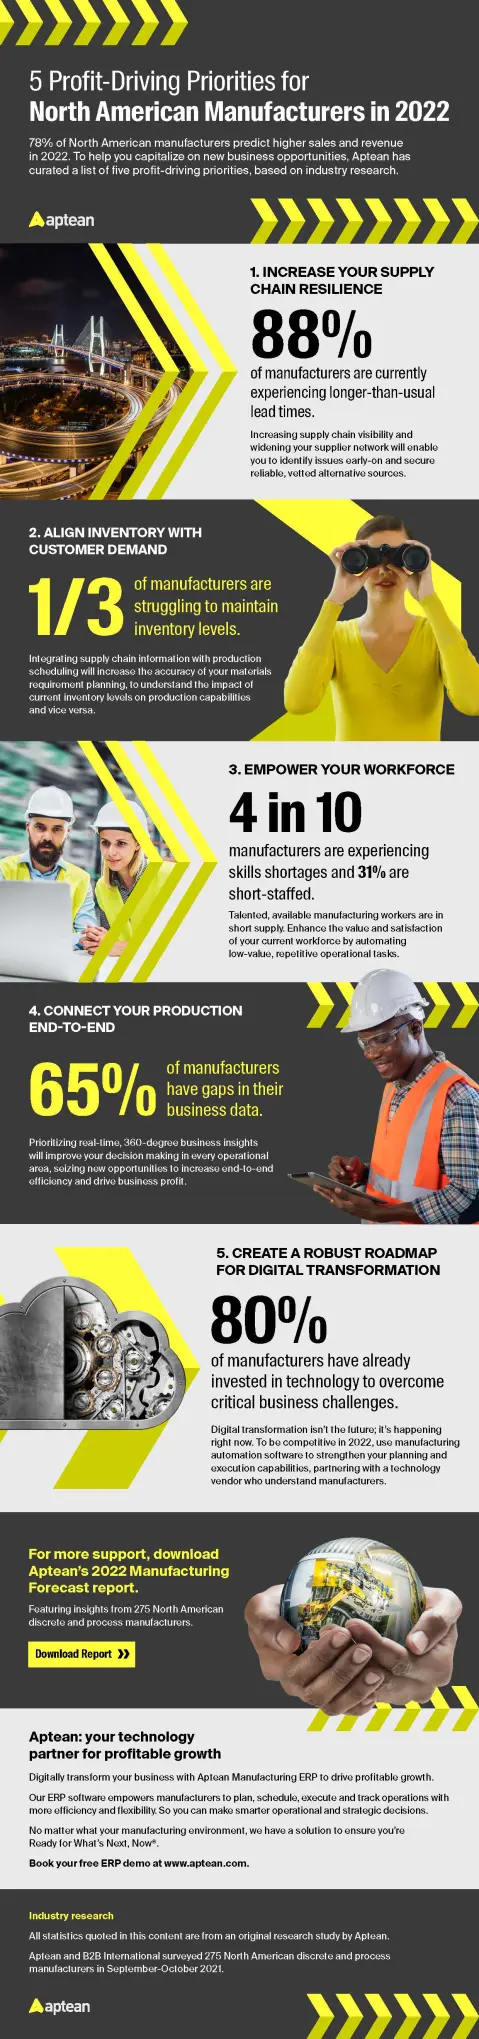 5 Profit-Driving Priorities for Manufacturers in 2022 Infographic